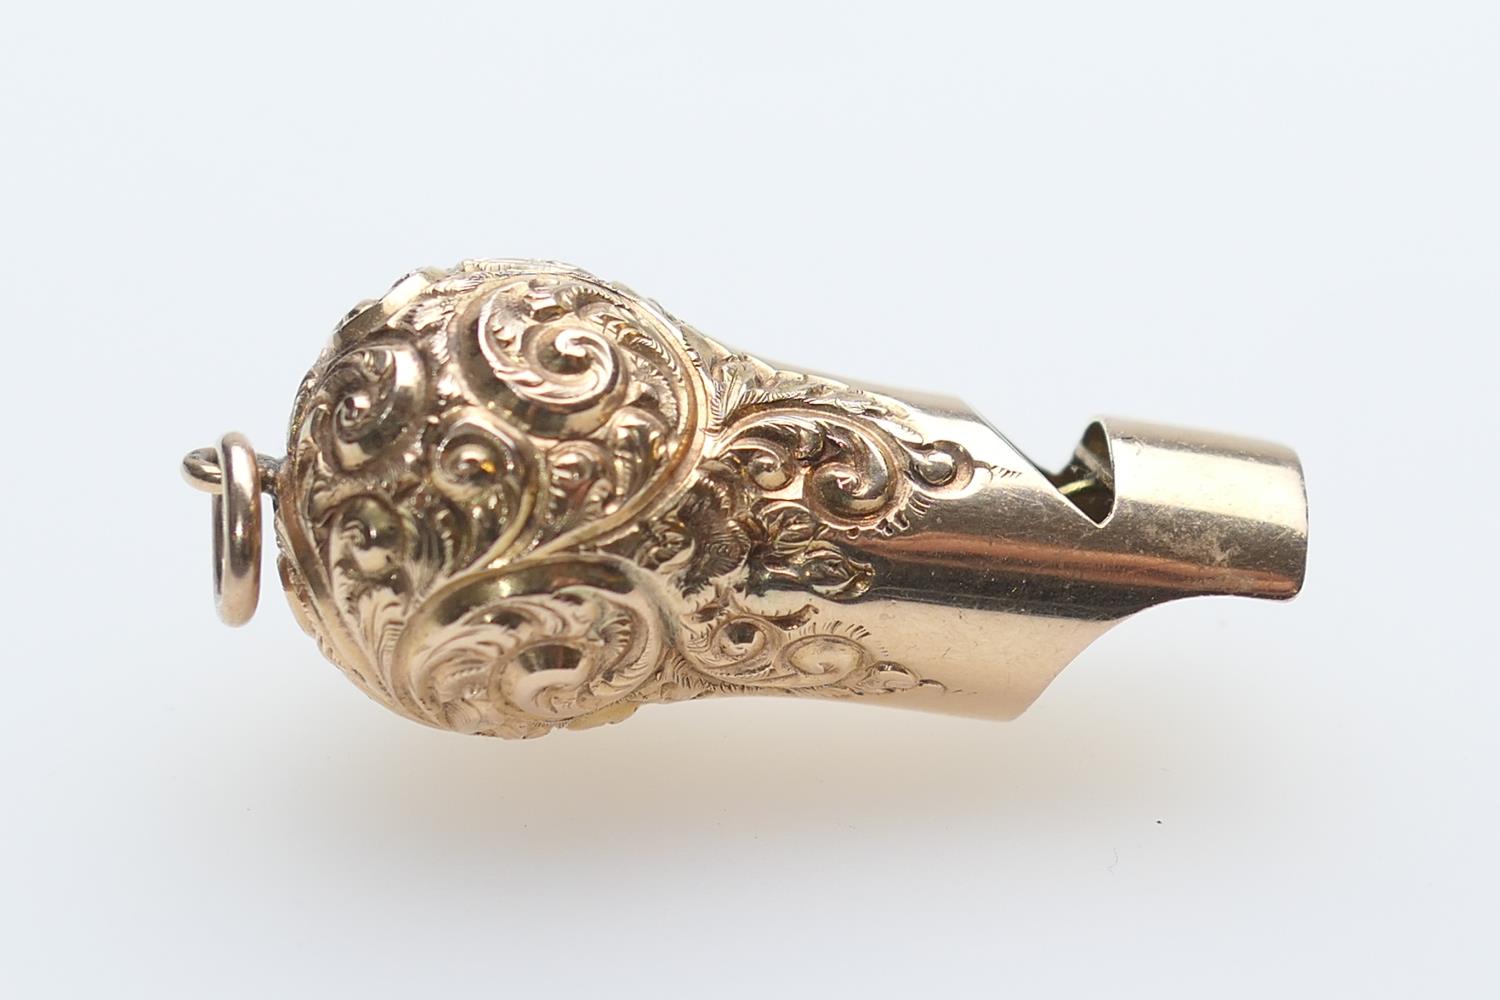 Rare Tiffany & Co. 14ct gold whistle, chased with foliate scrolls, with ring for suspension, - Image 4 of 4